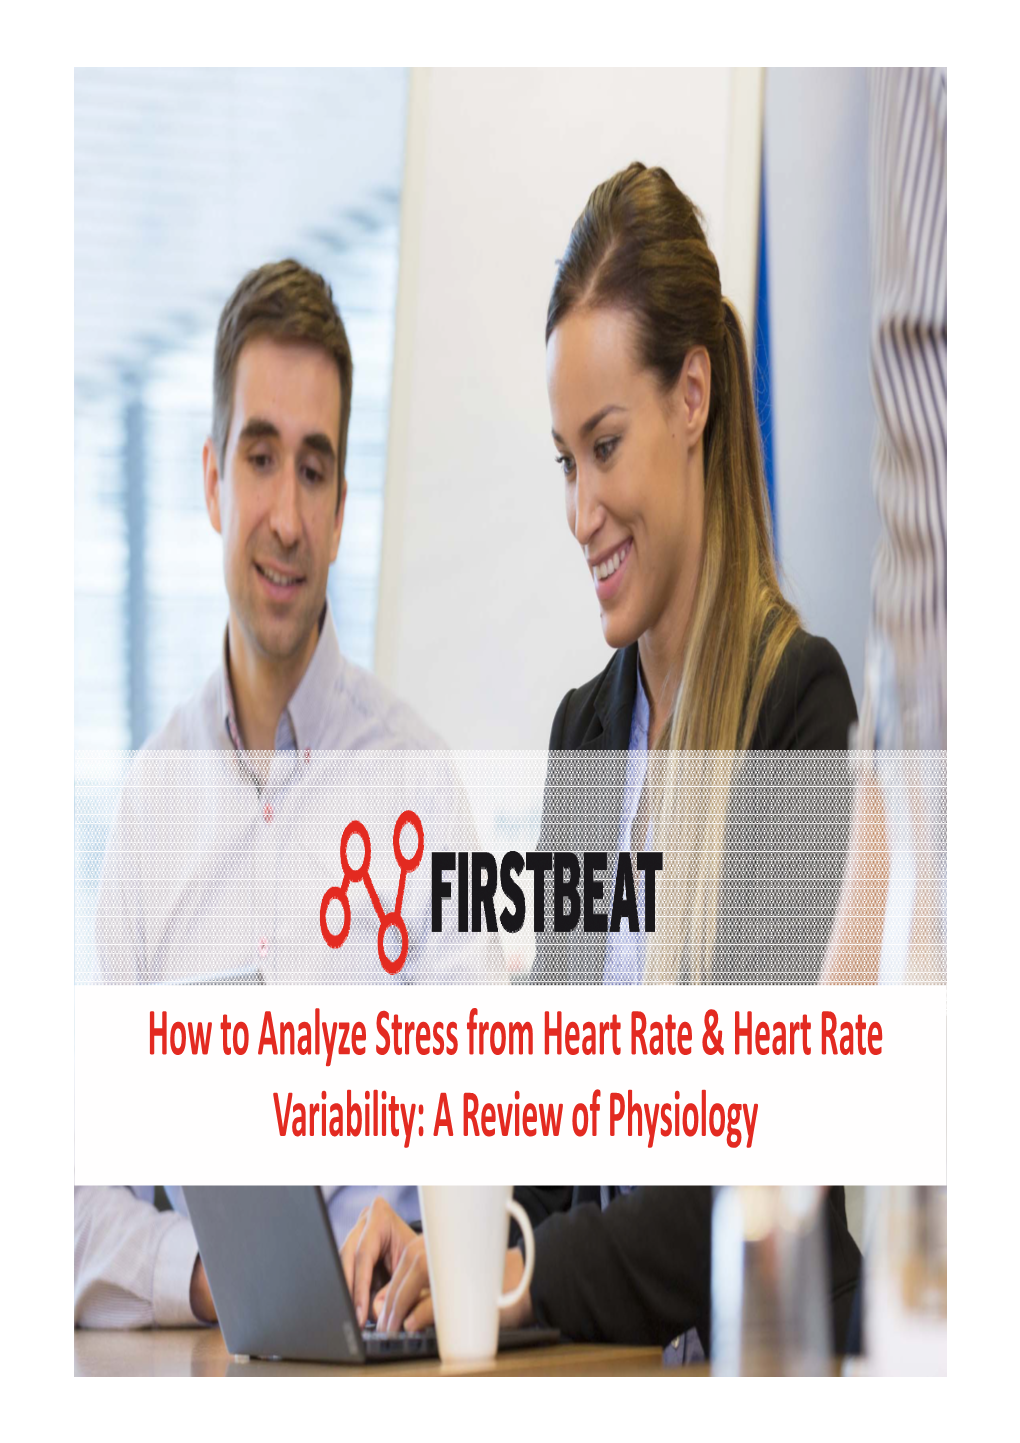 How to Analyze Stress from Heart Rate & Heart Rate Variability